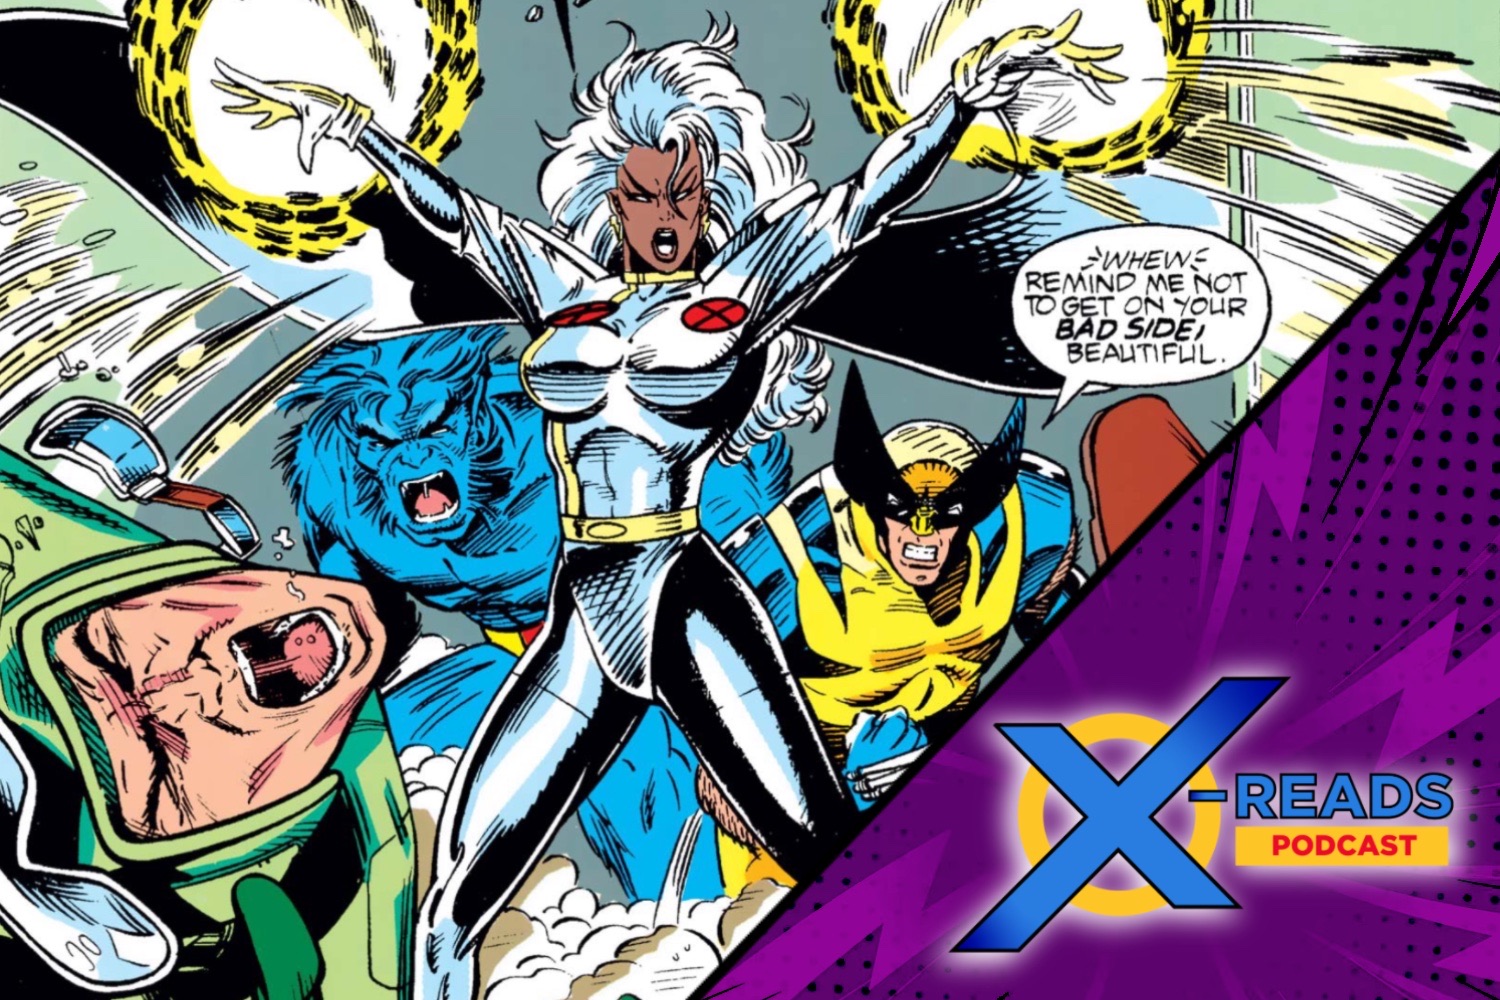 X-Reads Podcast Episode 118: 'X-Men Adventures' 2, 'X-Men '97', 'Deadpool and Wolverine', and the death of Morph